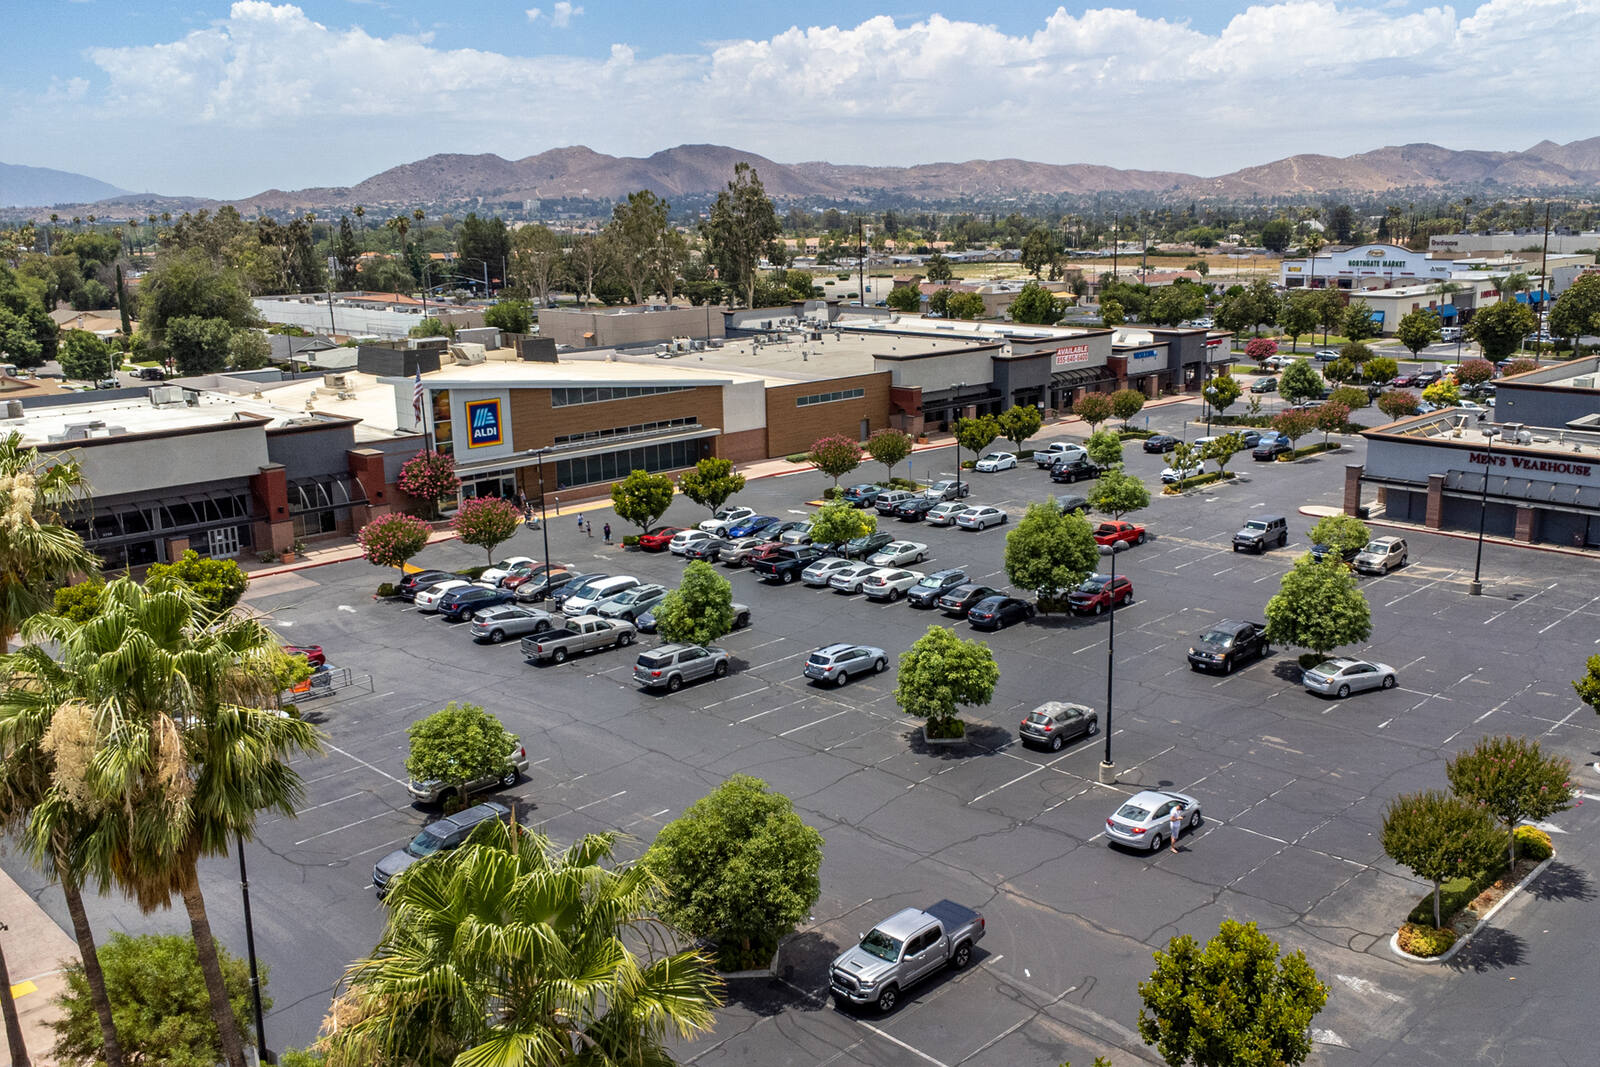 3601 Galleria At Tyler, Riverside, CA 92503 - Retail for Sale